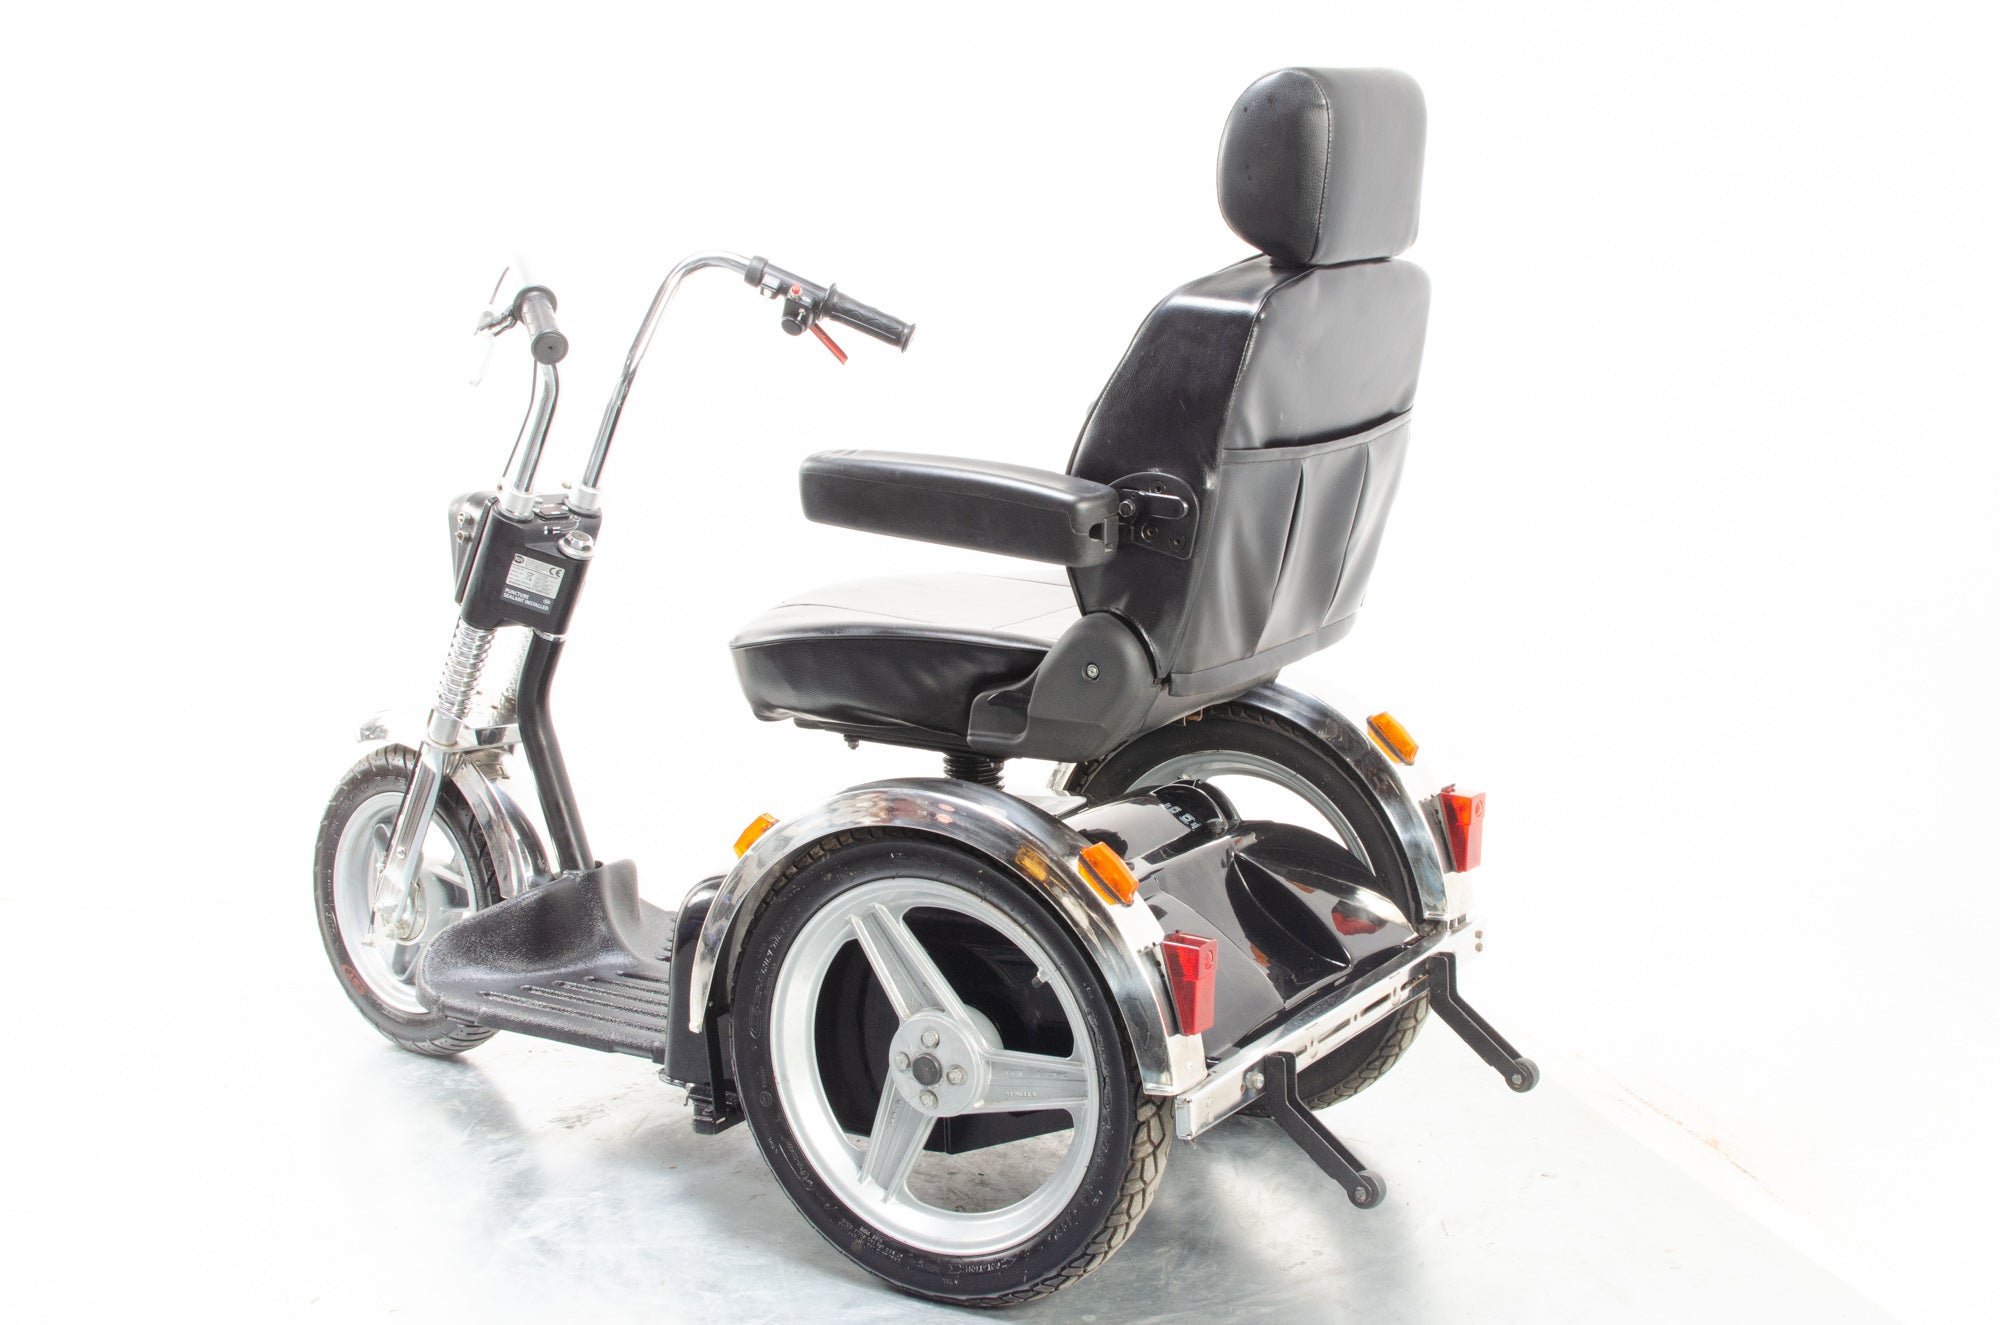 TGA Supersport Used Mobility Scooter 8mph Large Trike 3-Wheel Motorbike All-Terrain